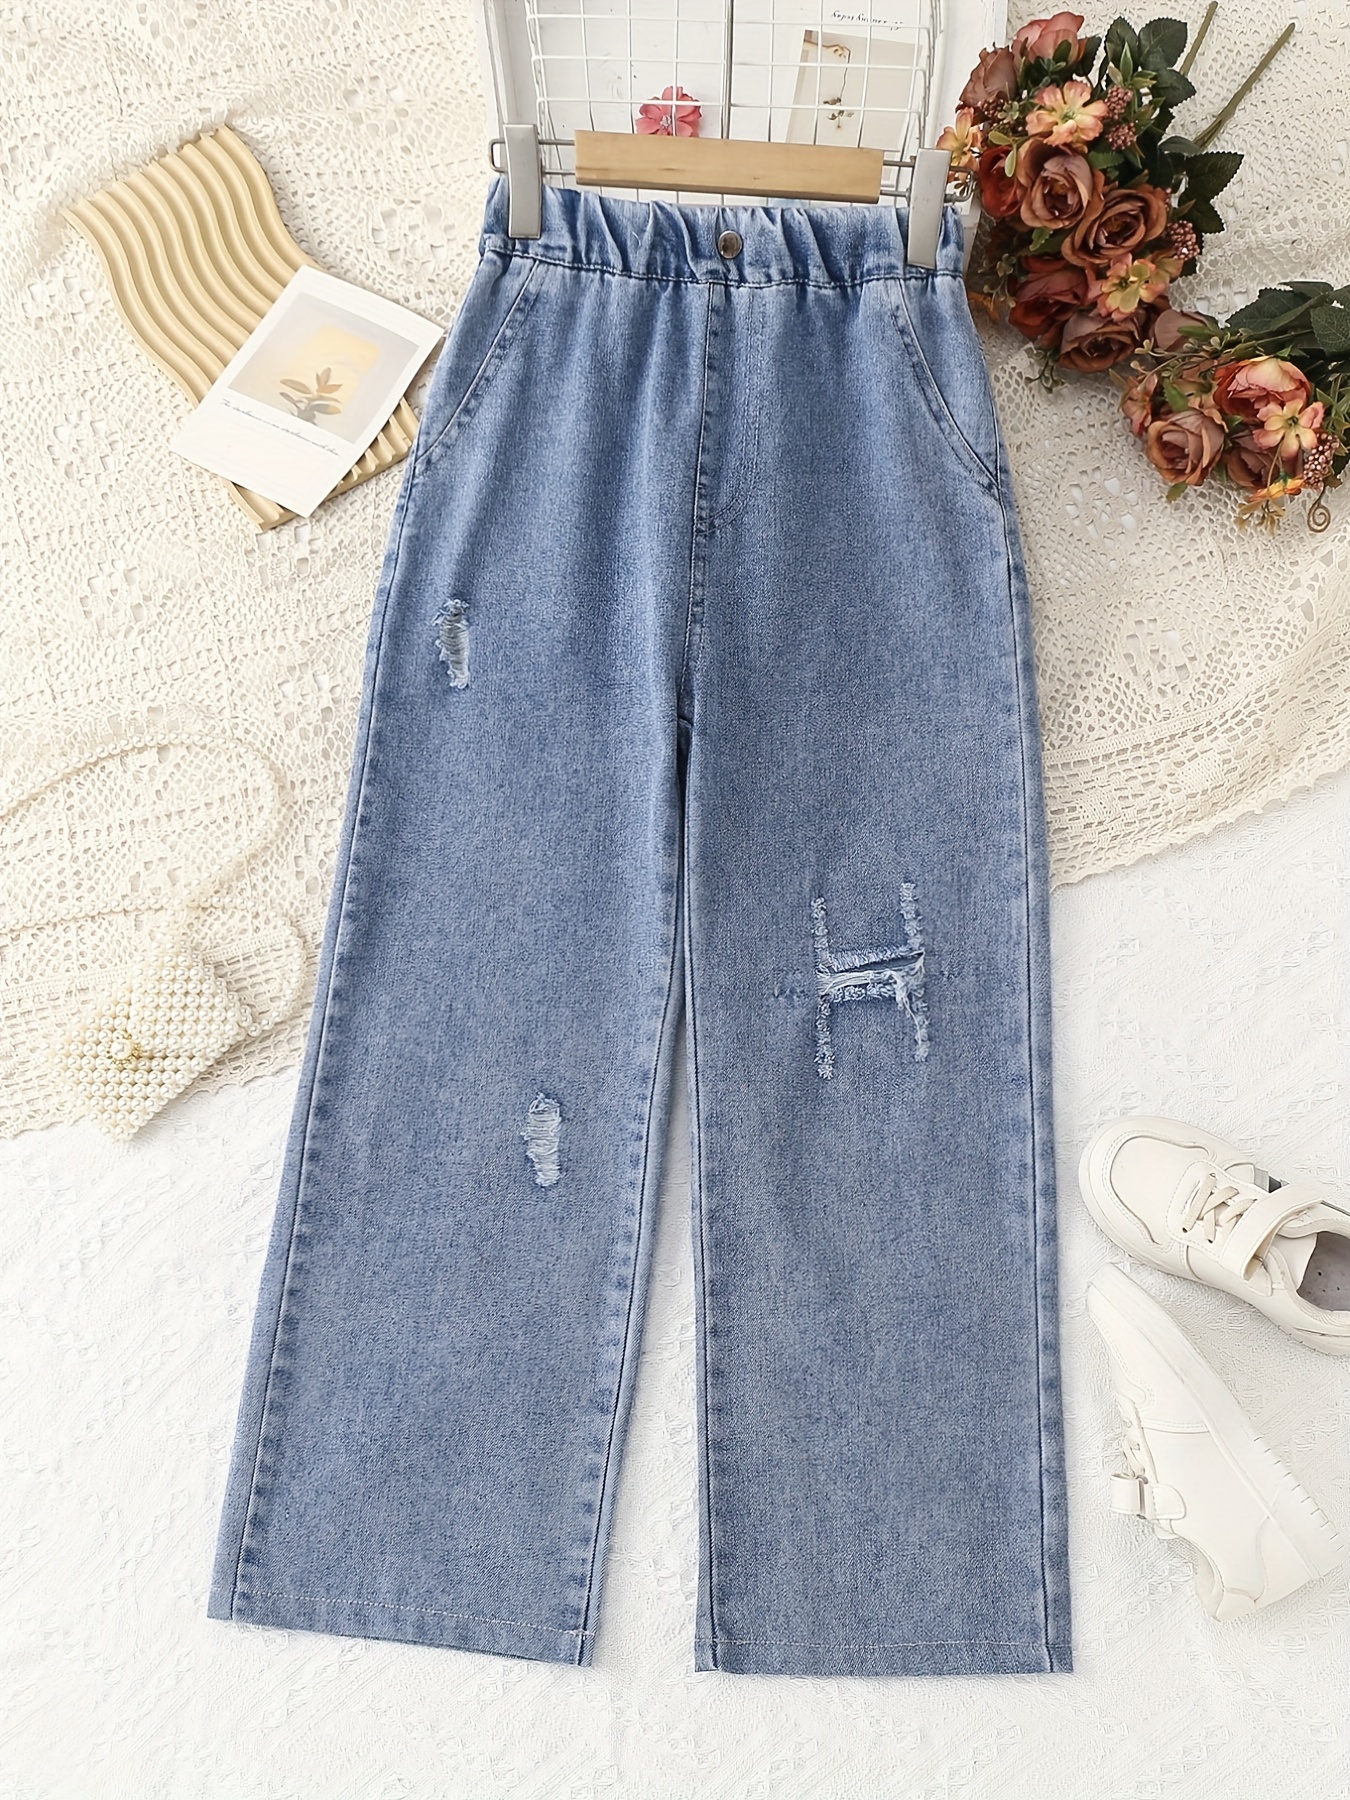 Youth Girls Kids Ripped Jeans Elastic Waist Hole Denim Pants Washed  Straight Wide Leg Denim Trousers Cool Jeans